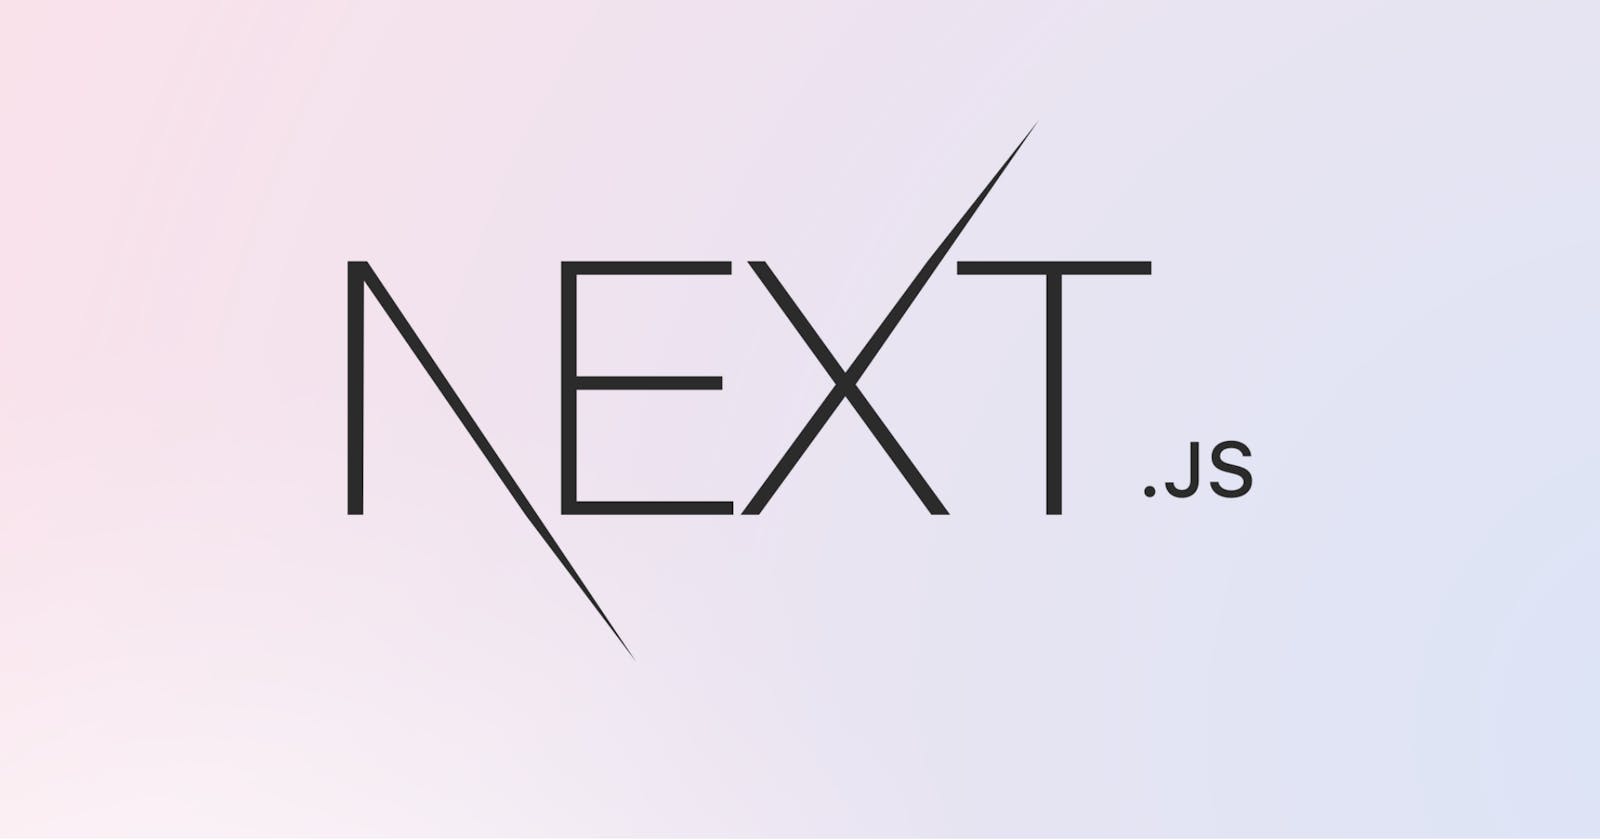 Getting started with NextJS - A Brief Introductory Guide